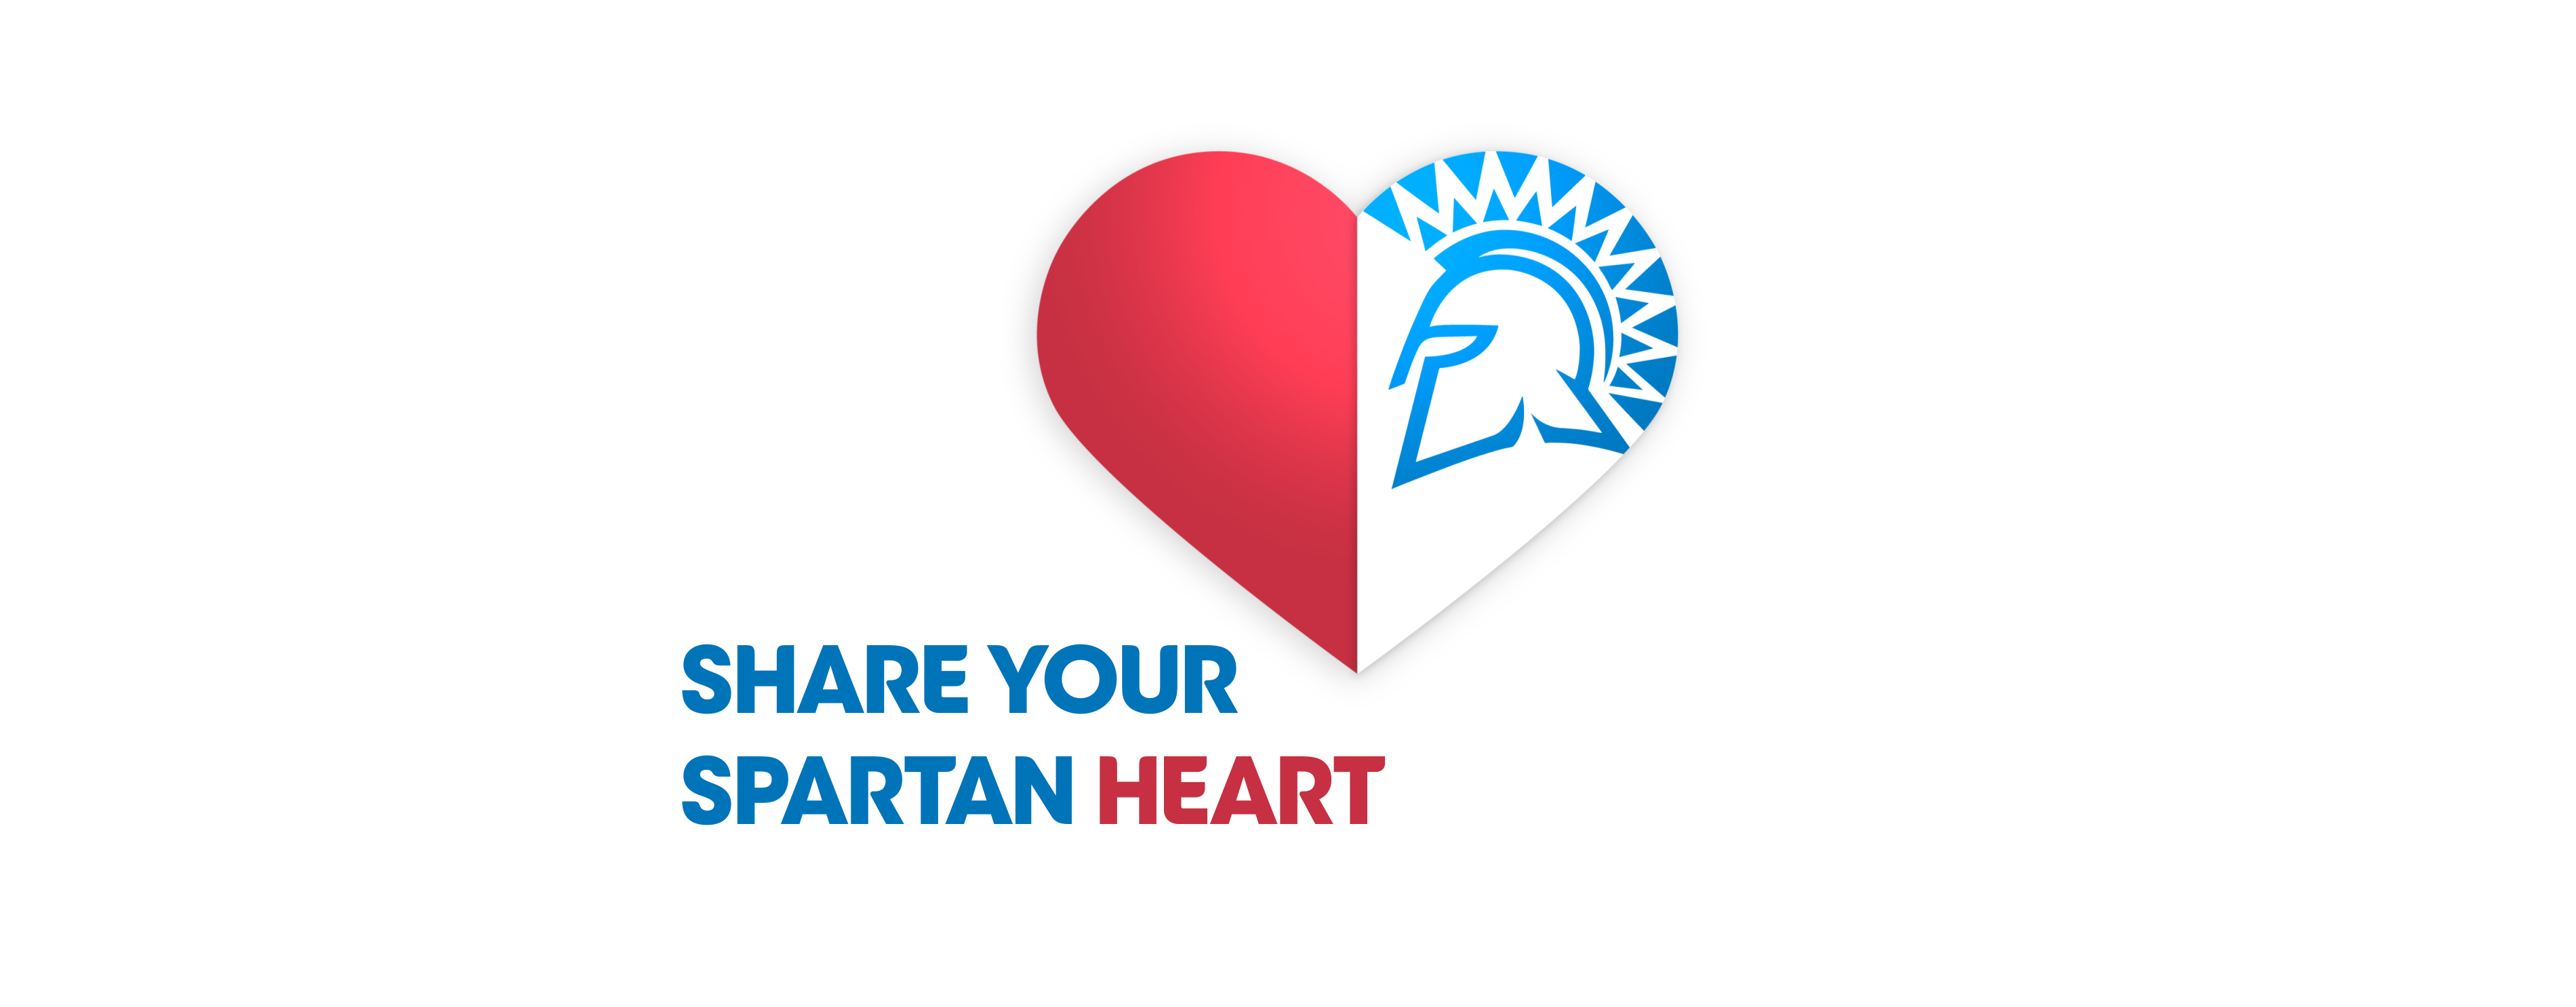 Share Your Spartan Heart